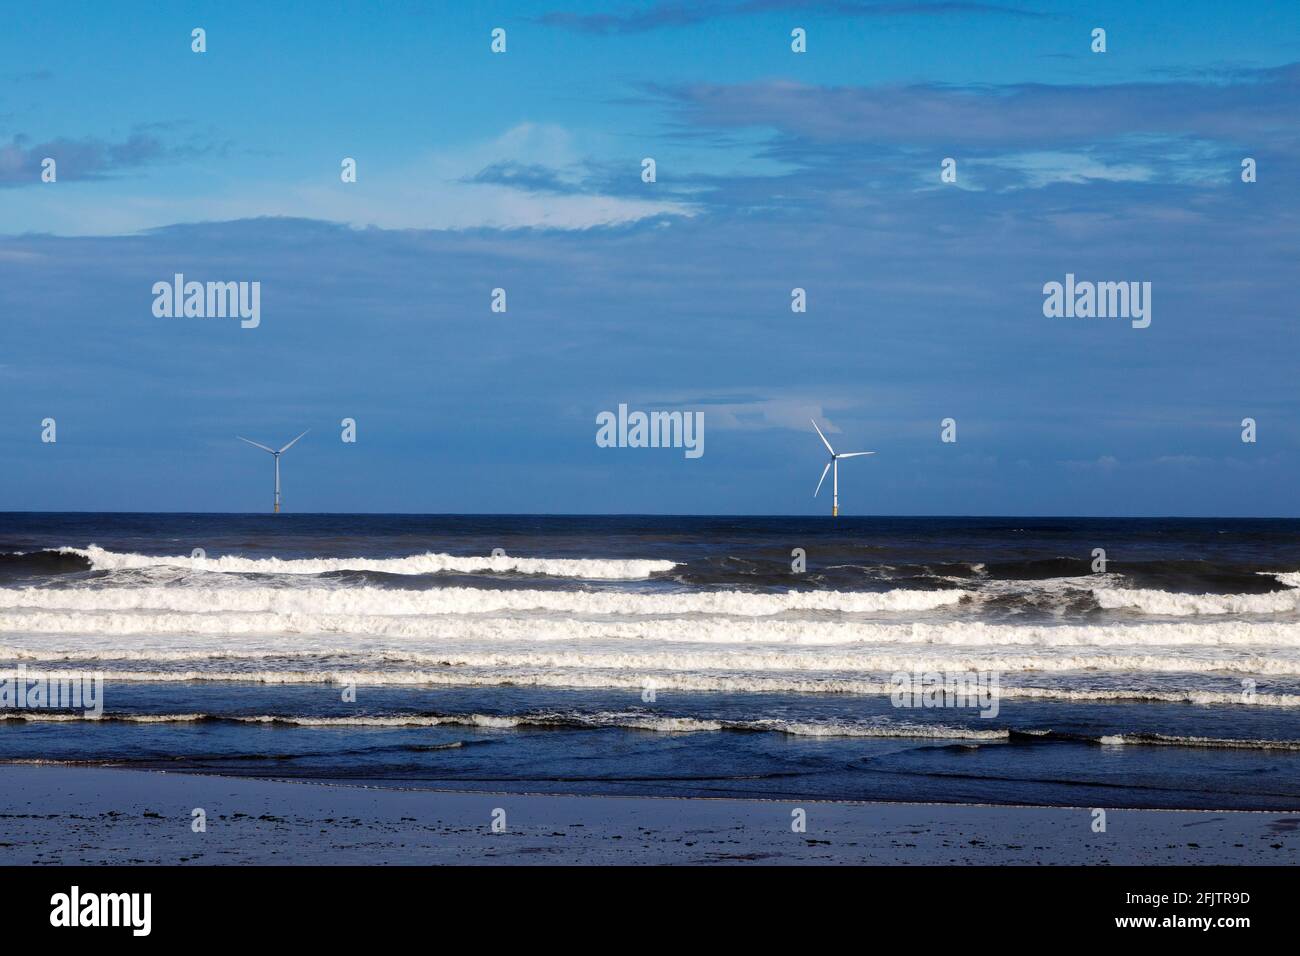 Turbines at Blyth Offshore Windfarm in Northumberland, England. North Sea waves roll into the beach at Blyth. Stock Photo